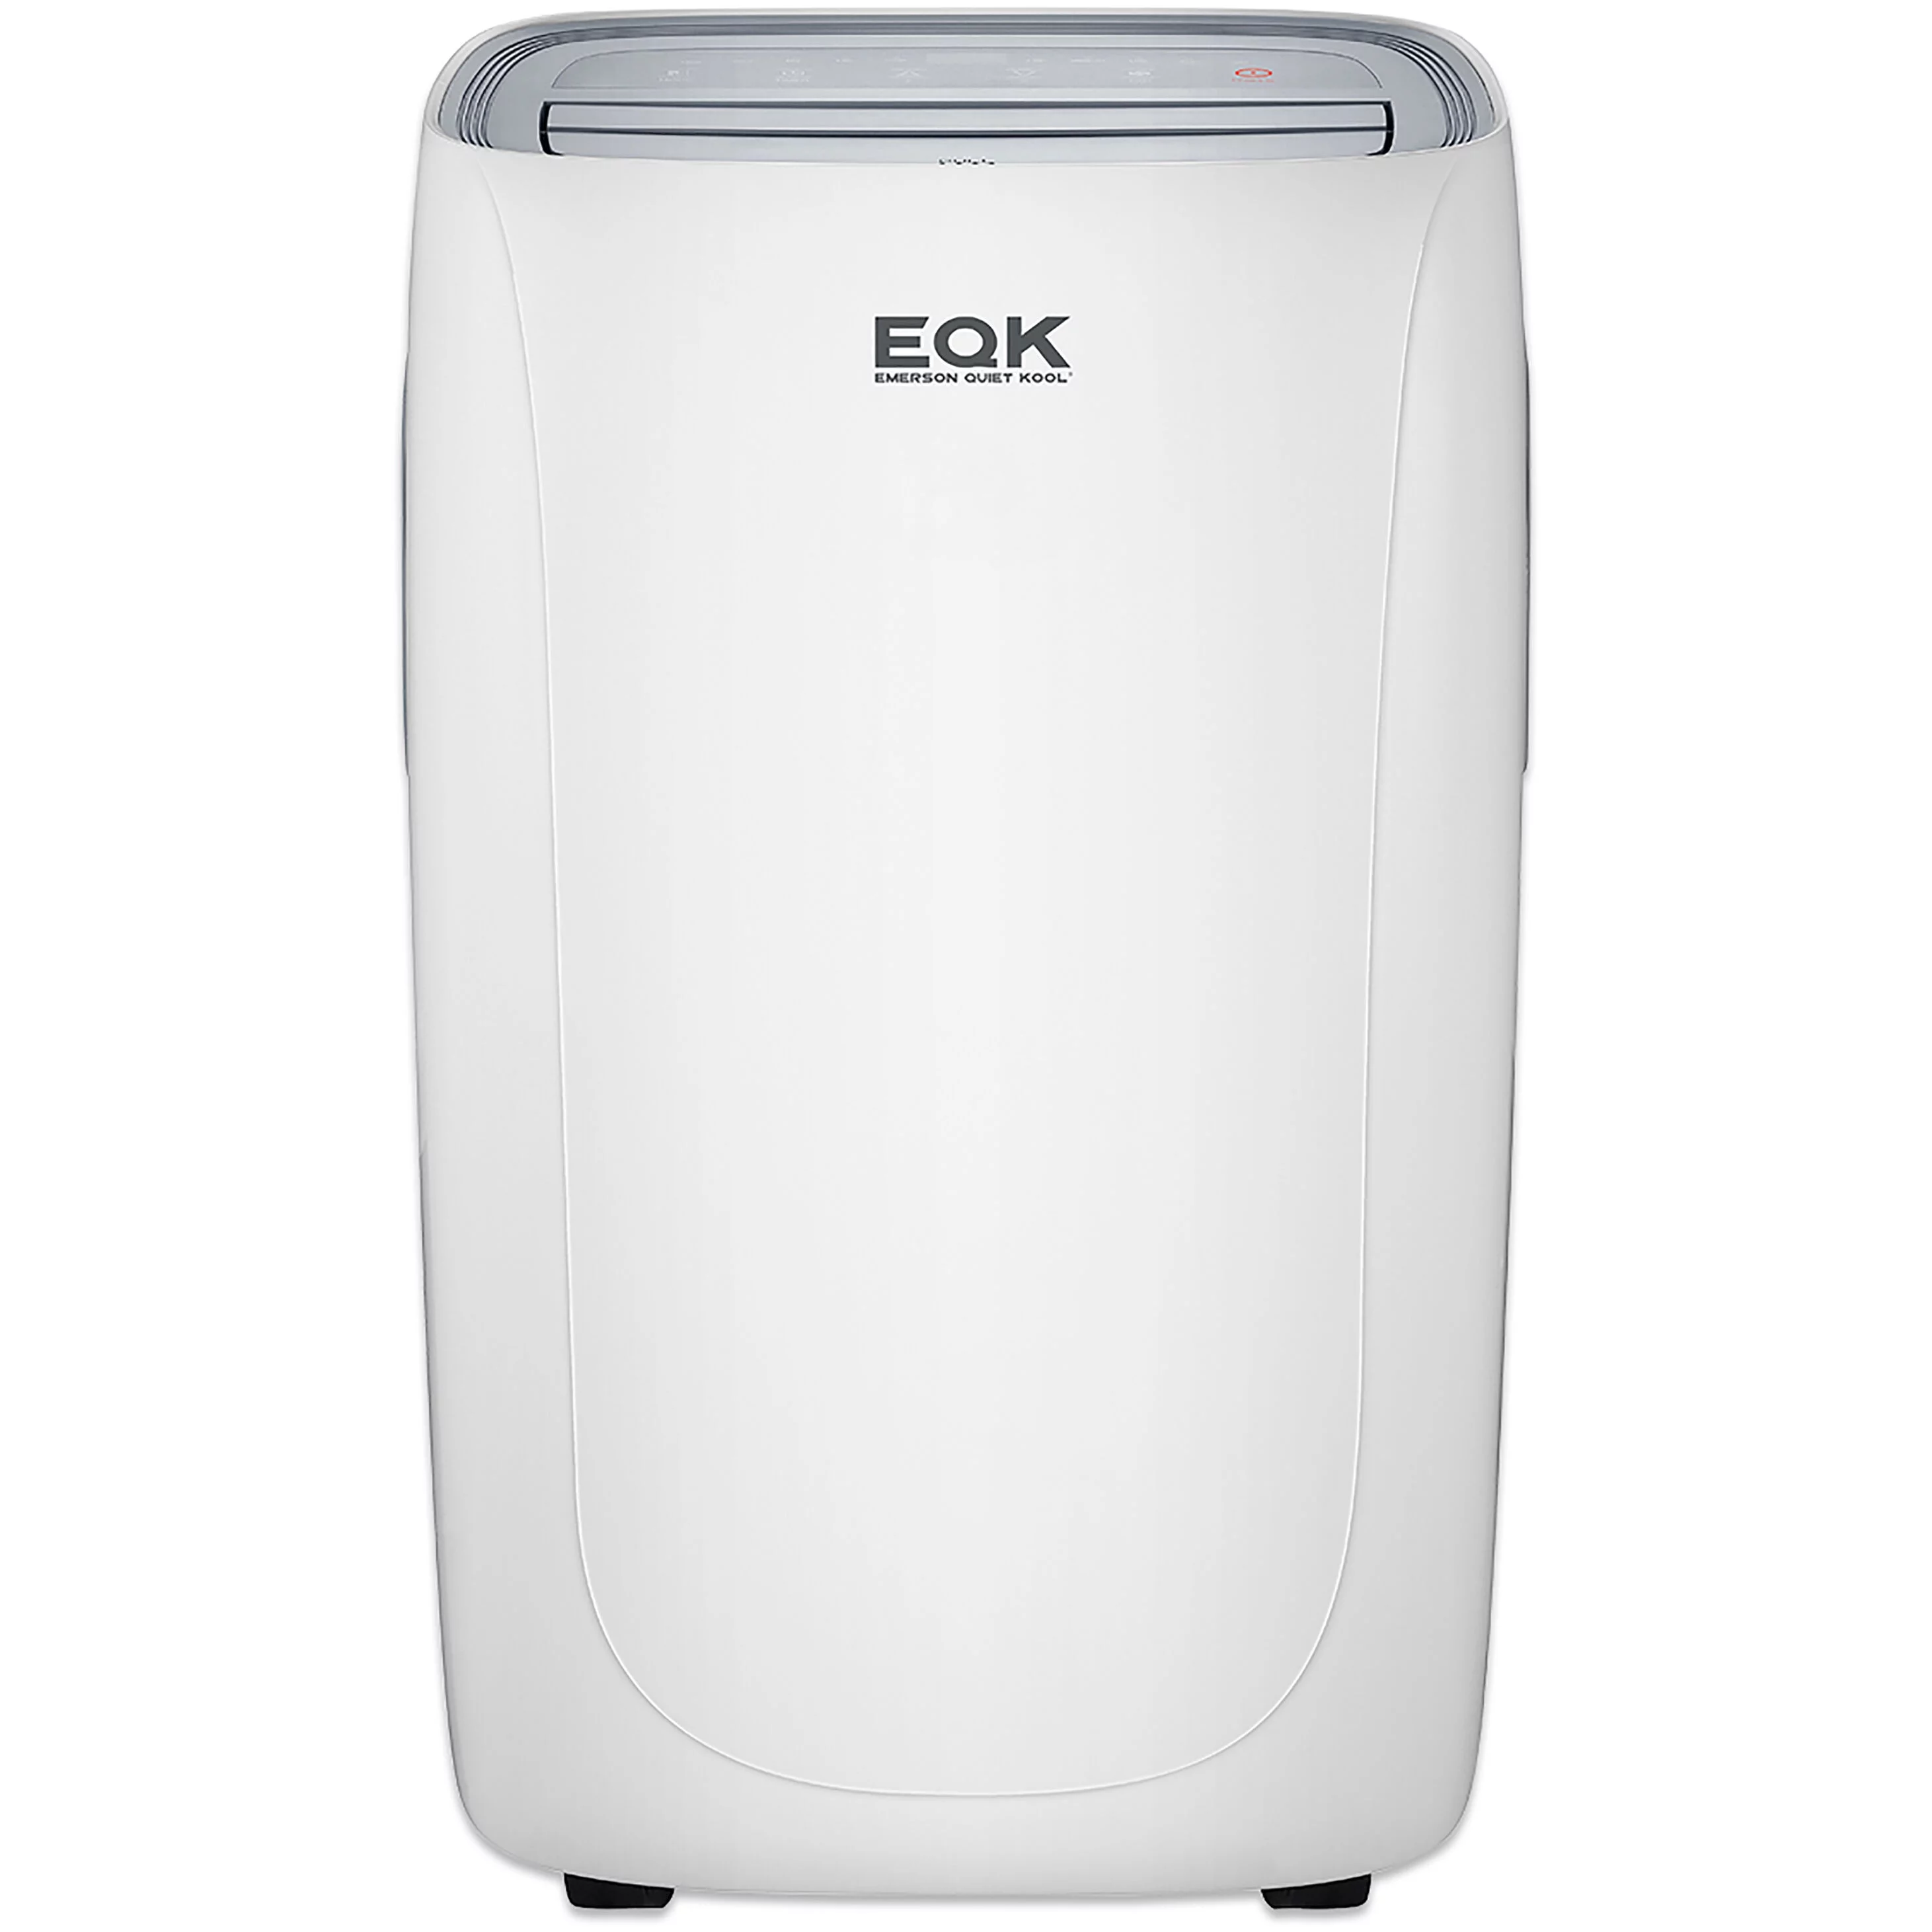 Emerson Quiet Kool 3 in 1 Portable Air Conditioner, Dehumidifier & Fan with Remote Control, for Rooms up to 450-Sq. ft. EAPC12RD1